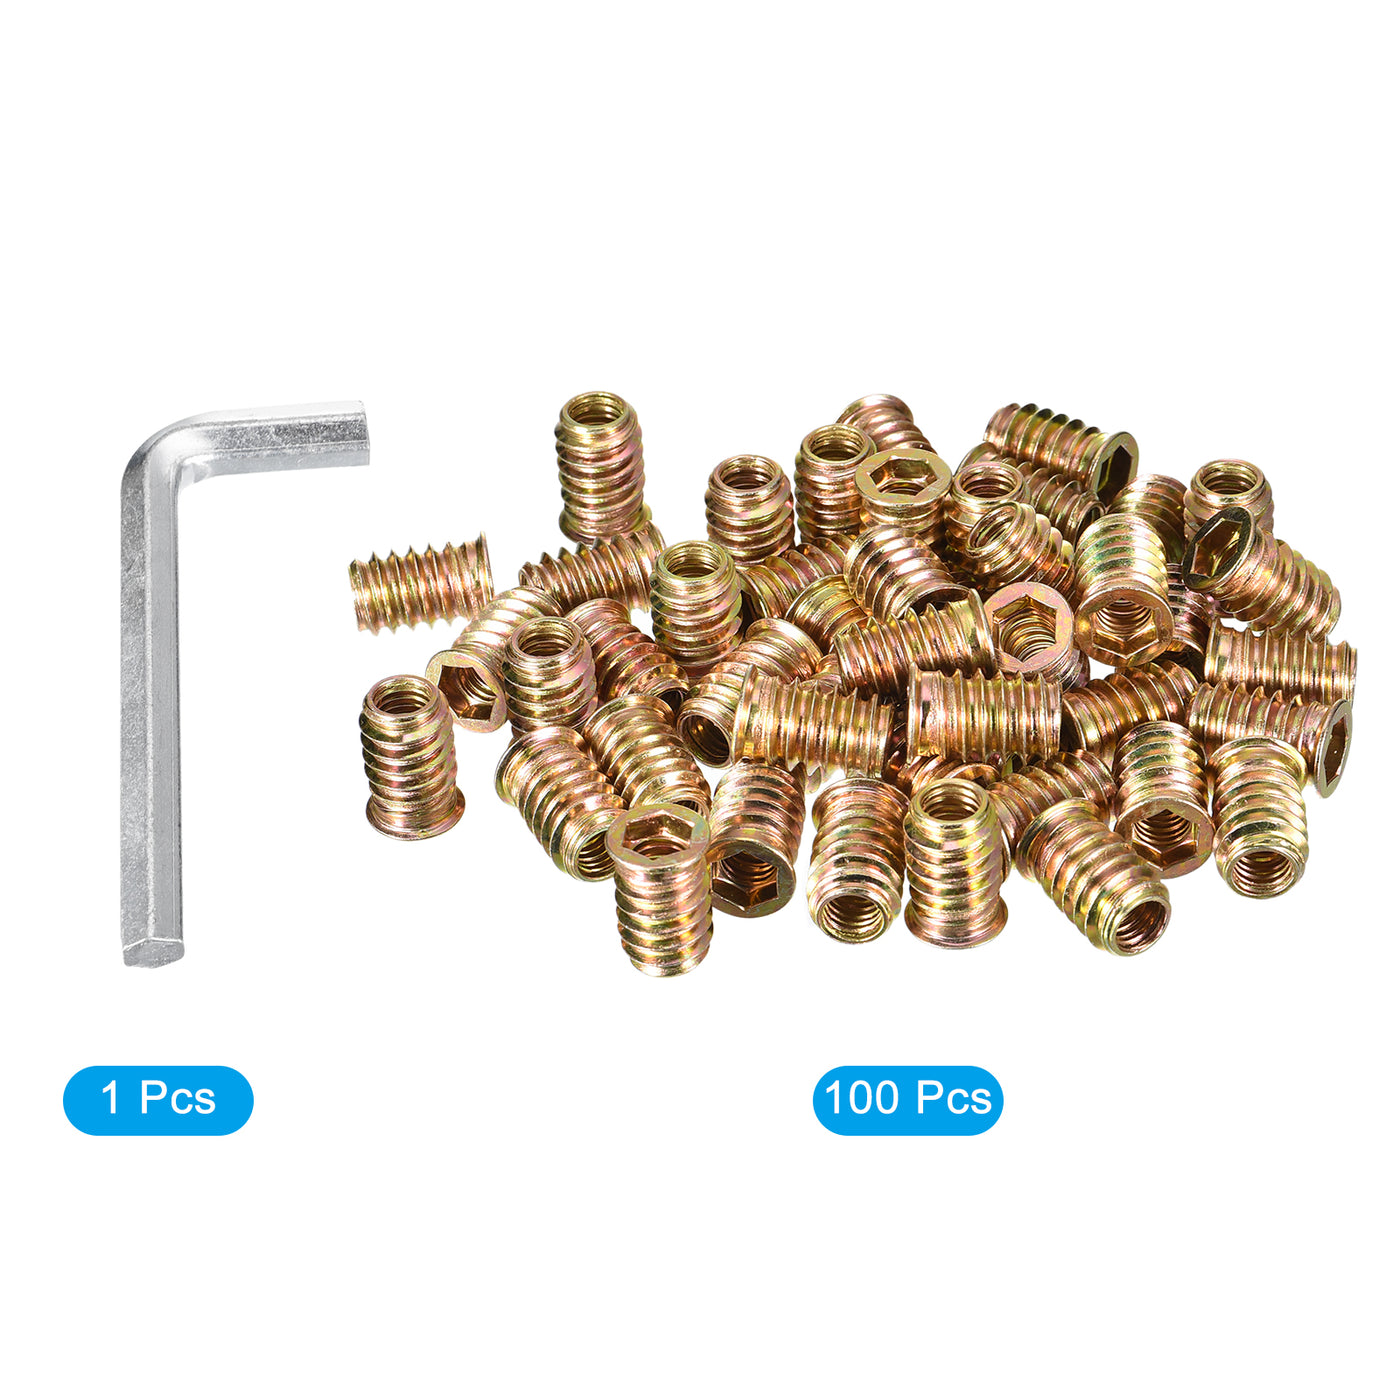 uxcell Uxcell Threaded Inserts Nuts, Threaded Inserts for Wood Furniture, Hex Socket Drive Wood Insert Nuts with Hex Wrench